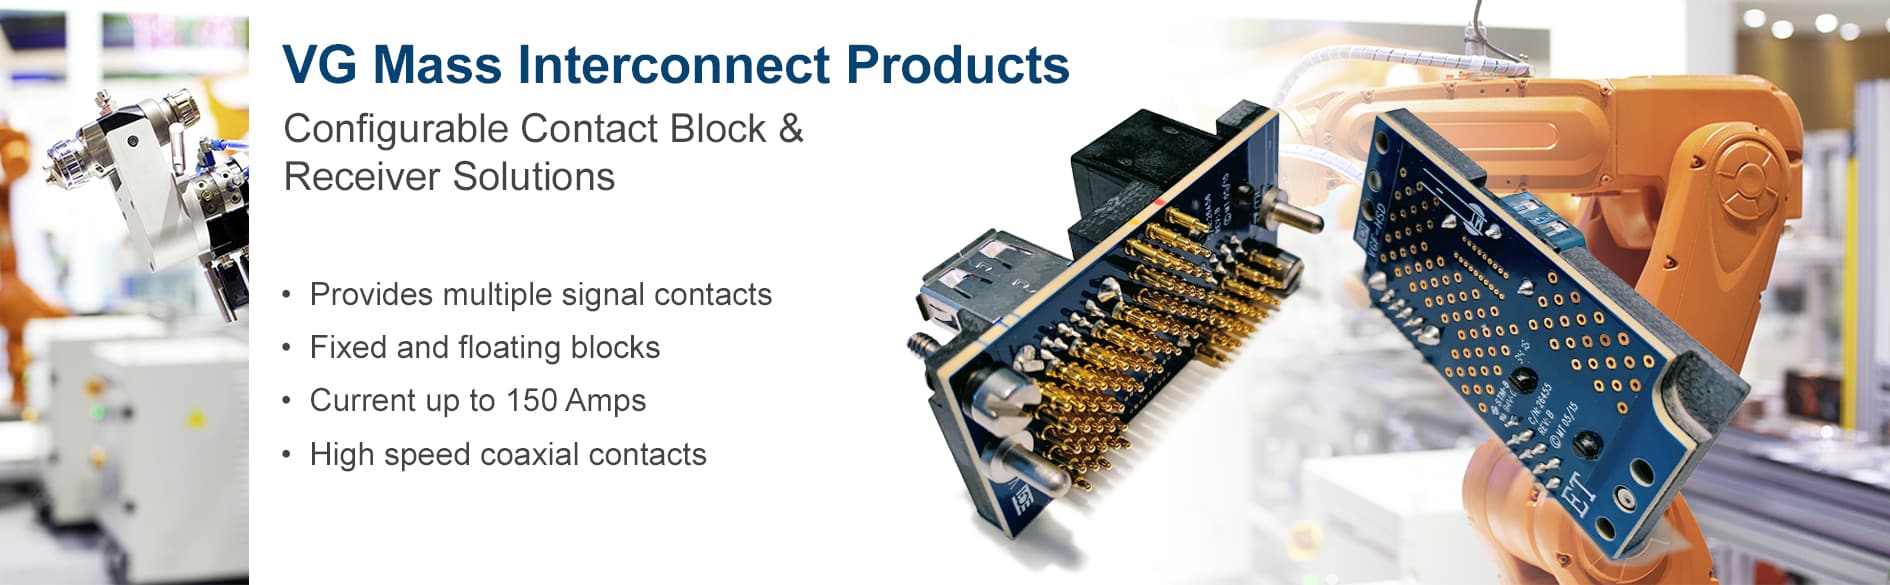 Click to learn more about VG Mass Interconnect products